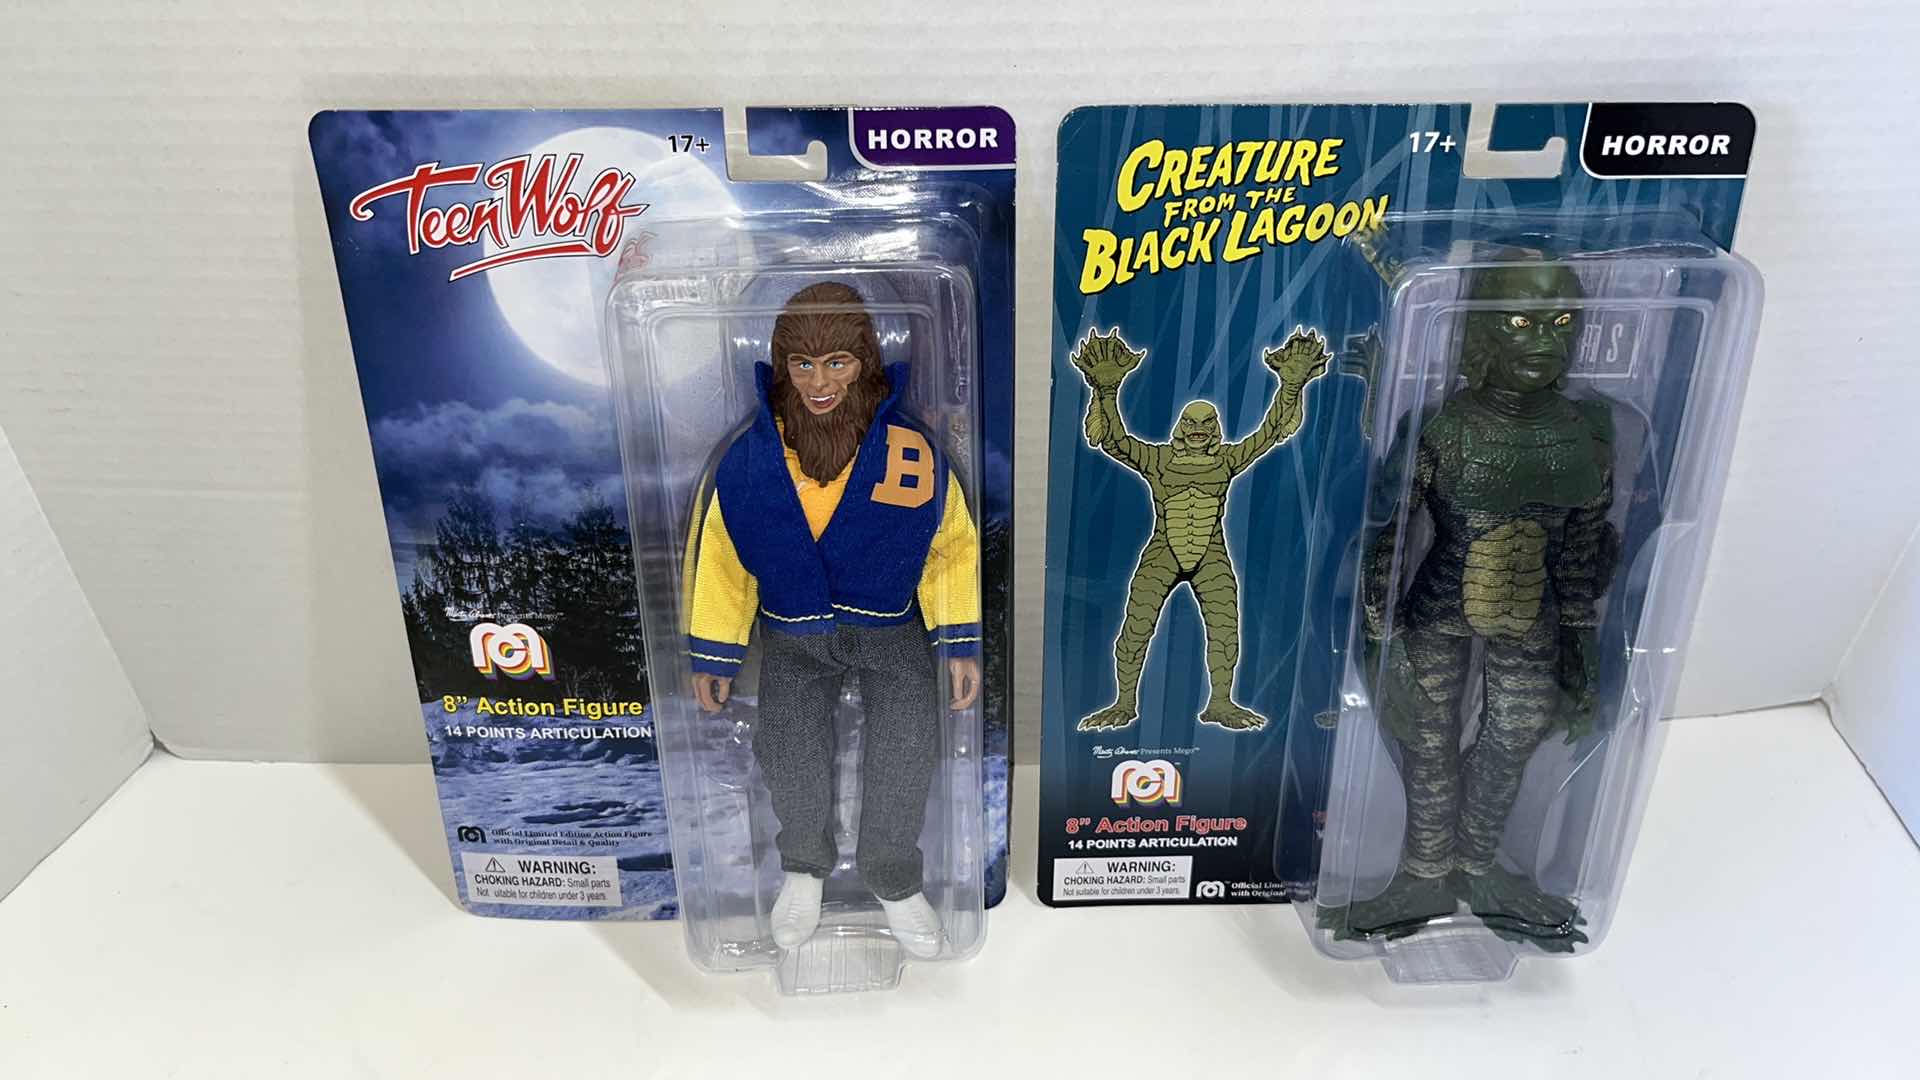 Photo 1 of NIB WORLDS GREATEST MEGO MONSTERS 8” ACTION FIGURE, TEEN WOLF & CREATURE FROM THE BLACK LAGOON (2)